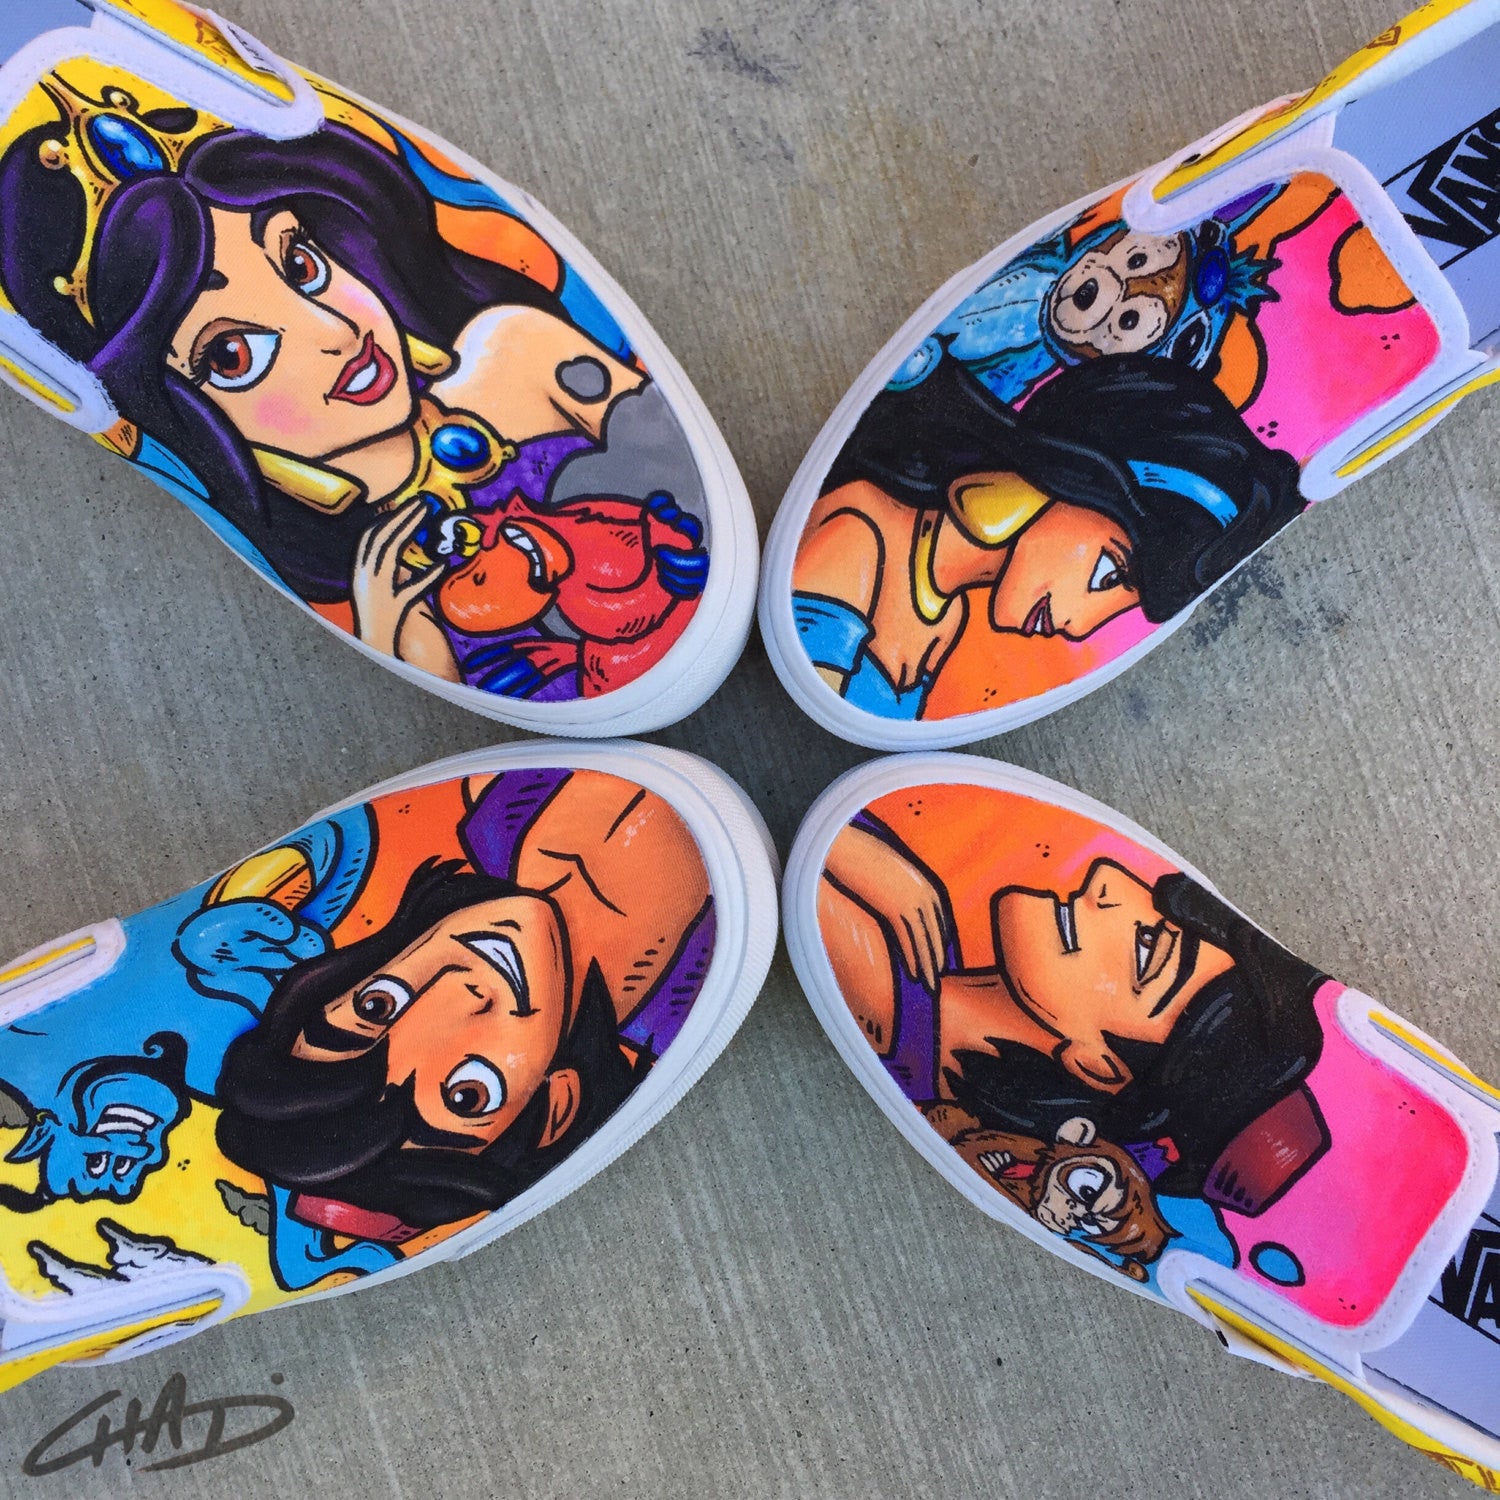 Aladdin Hand Painted Vans Slip On shoes